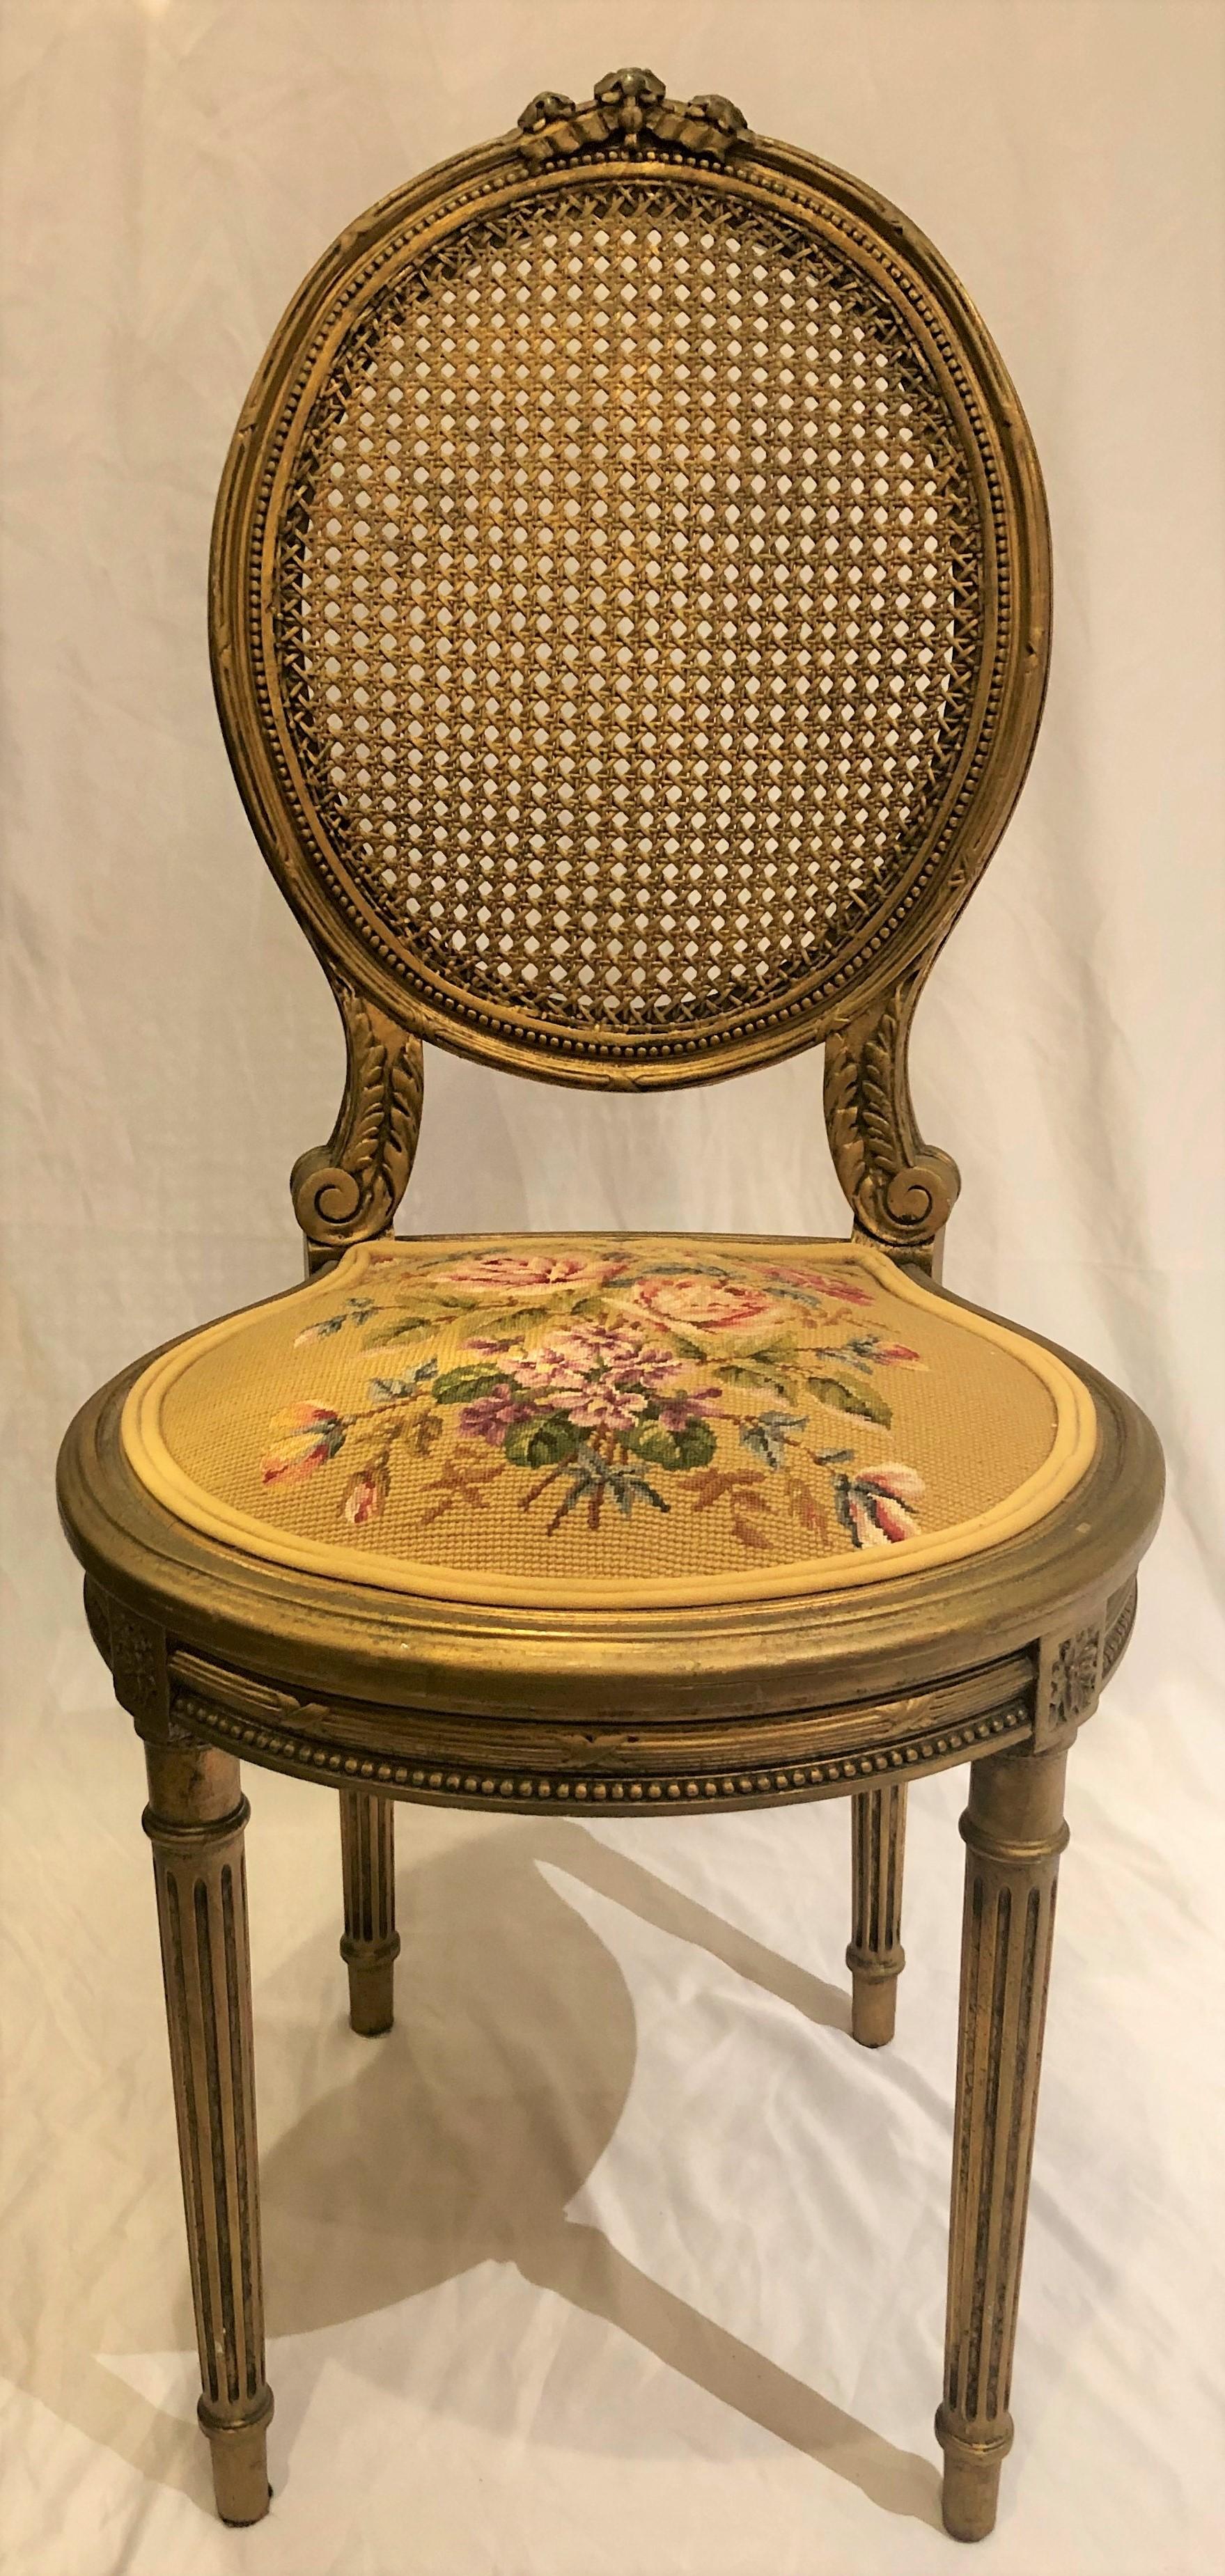 Antique French carved wood gilt side chair, circa 1870-1880
FOC061.